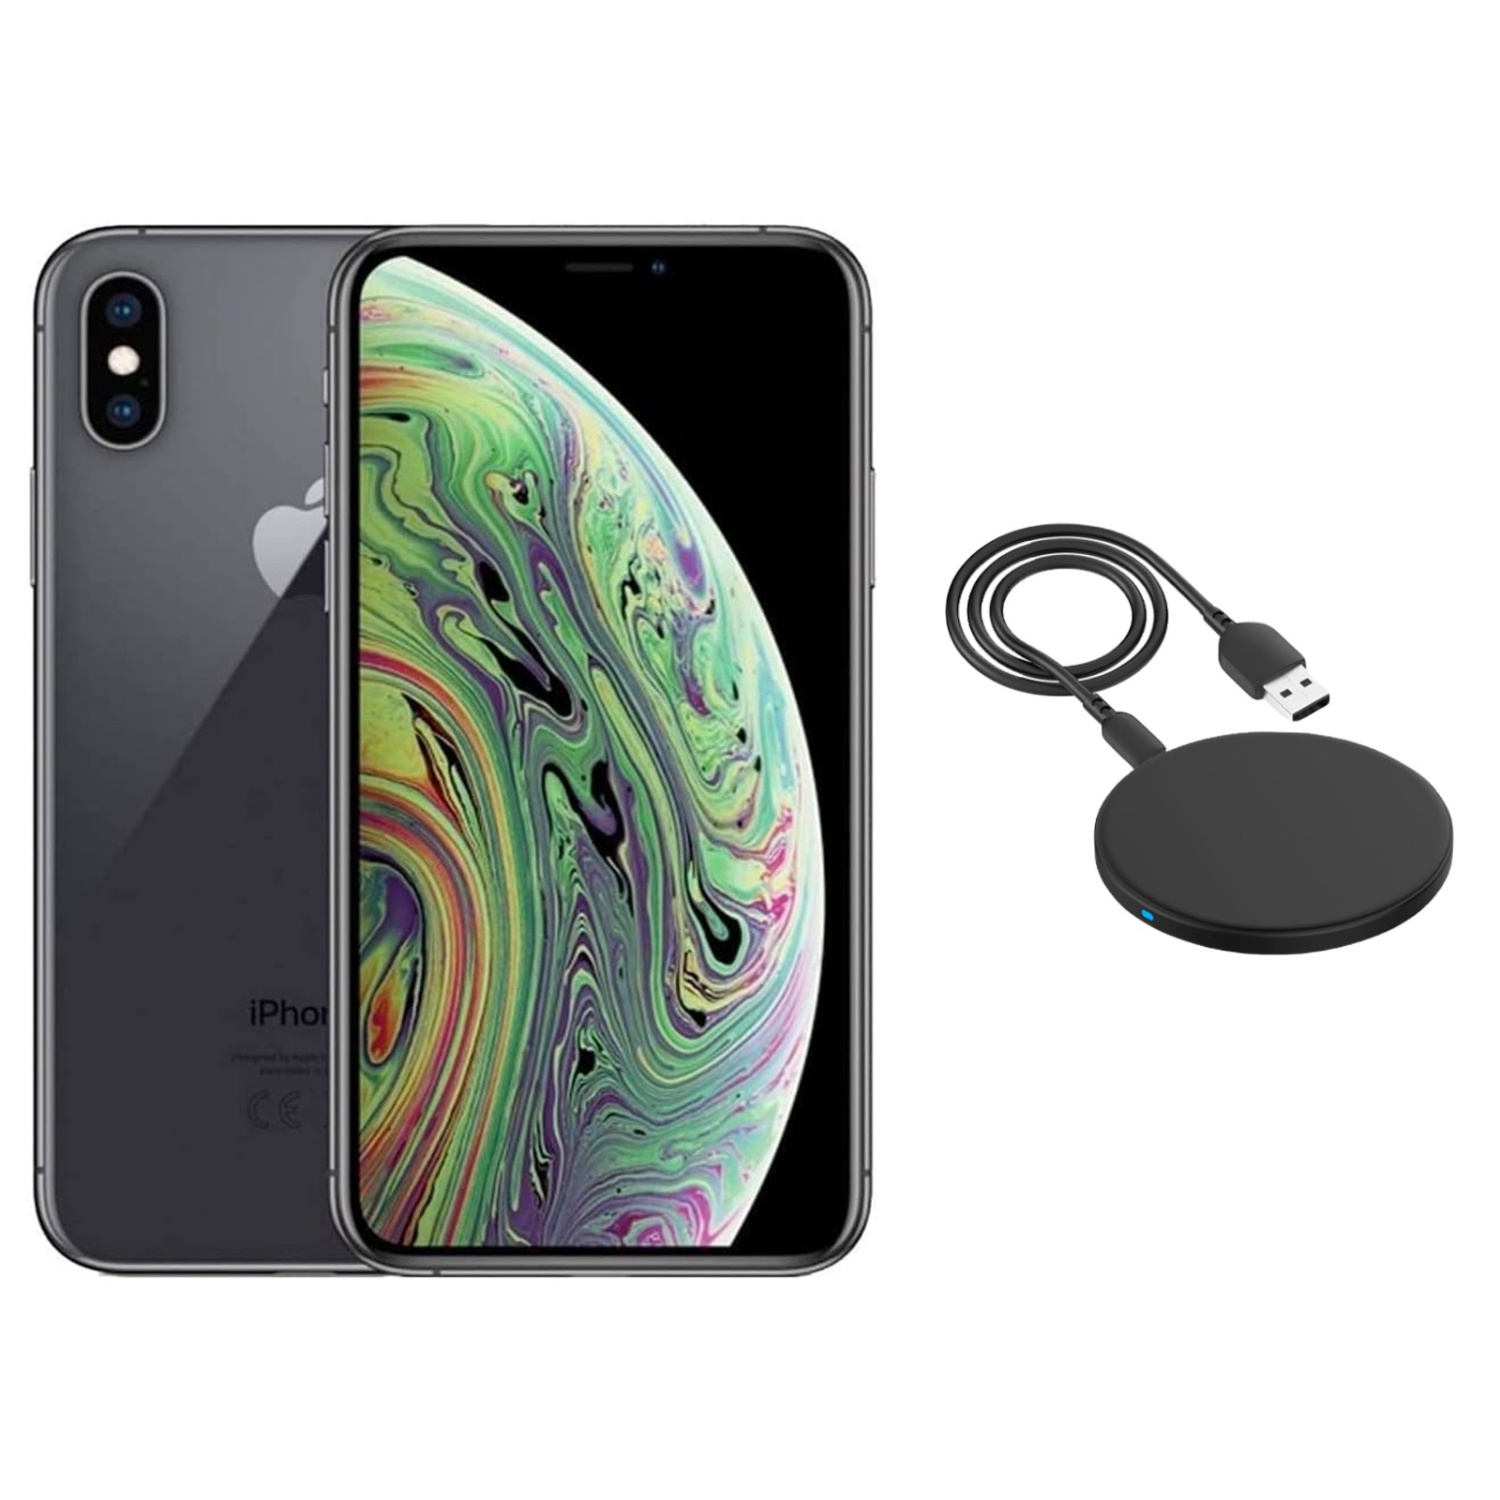 Refurbished (Good) Apple iPhone XS Max A1921 (Fully Unlocked) 64GB Space Gray w/ Wireless Charger